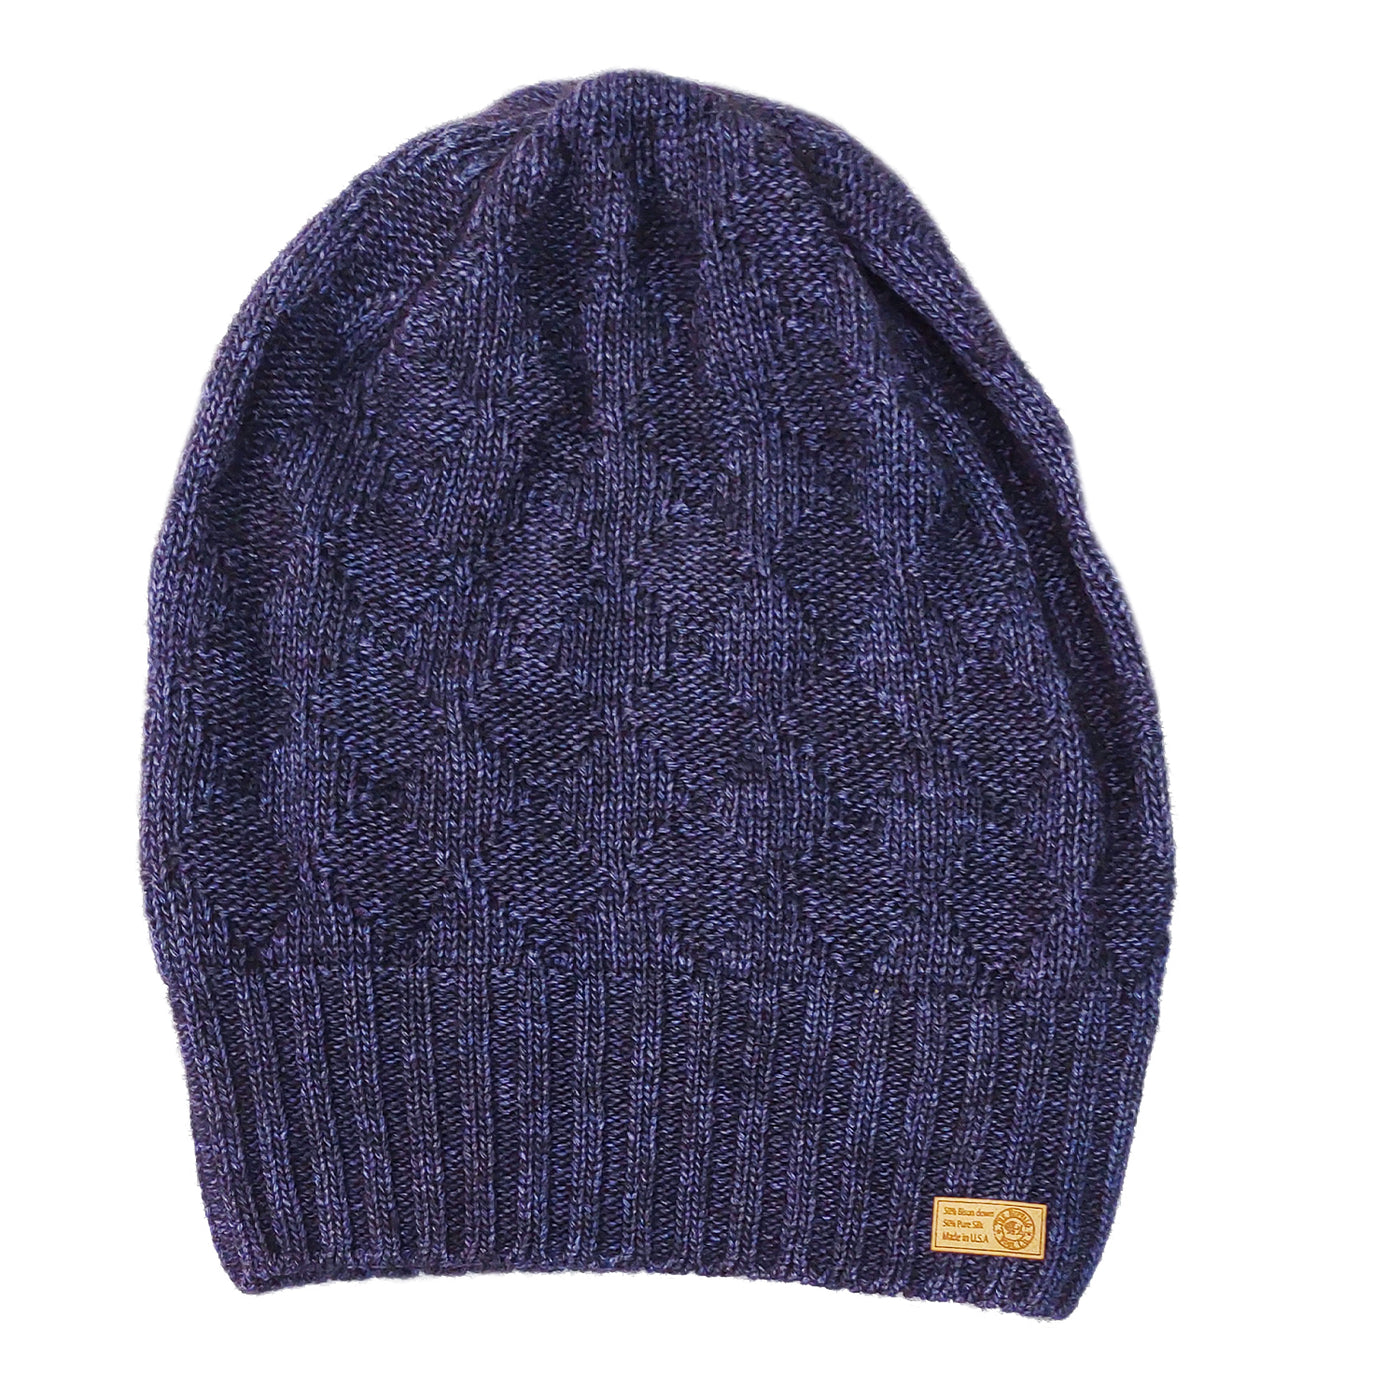 Bison Beanie Slouched